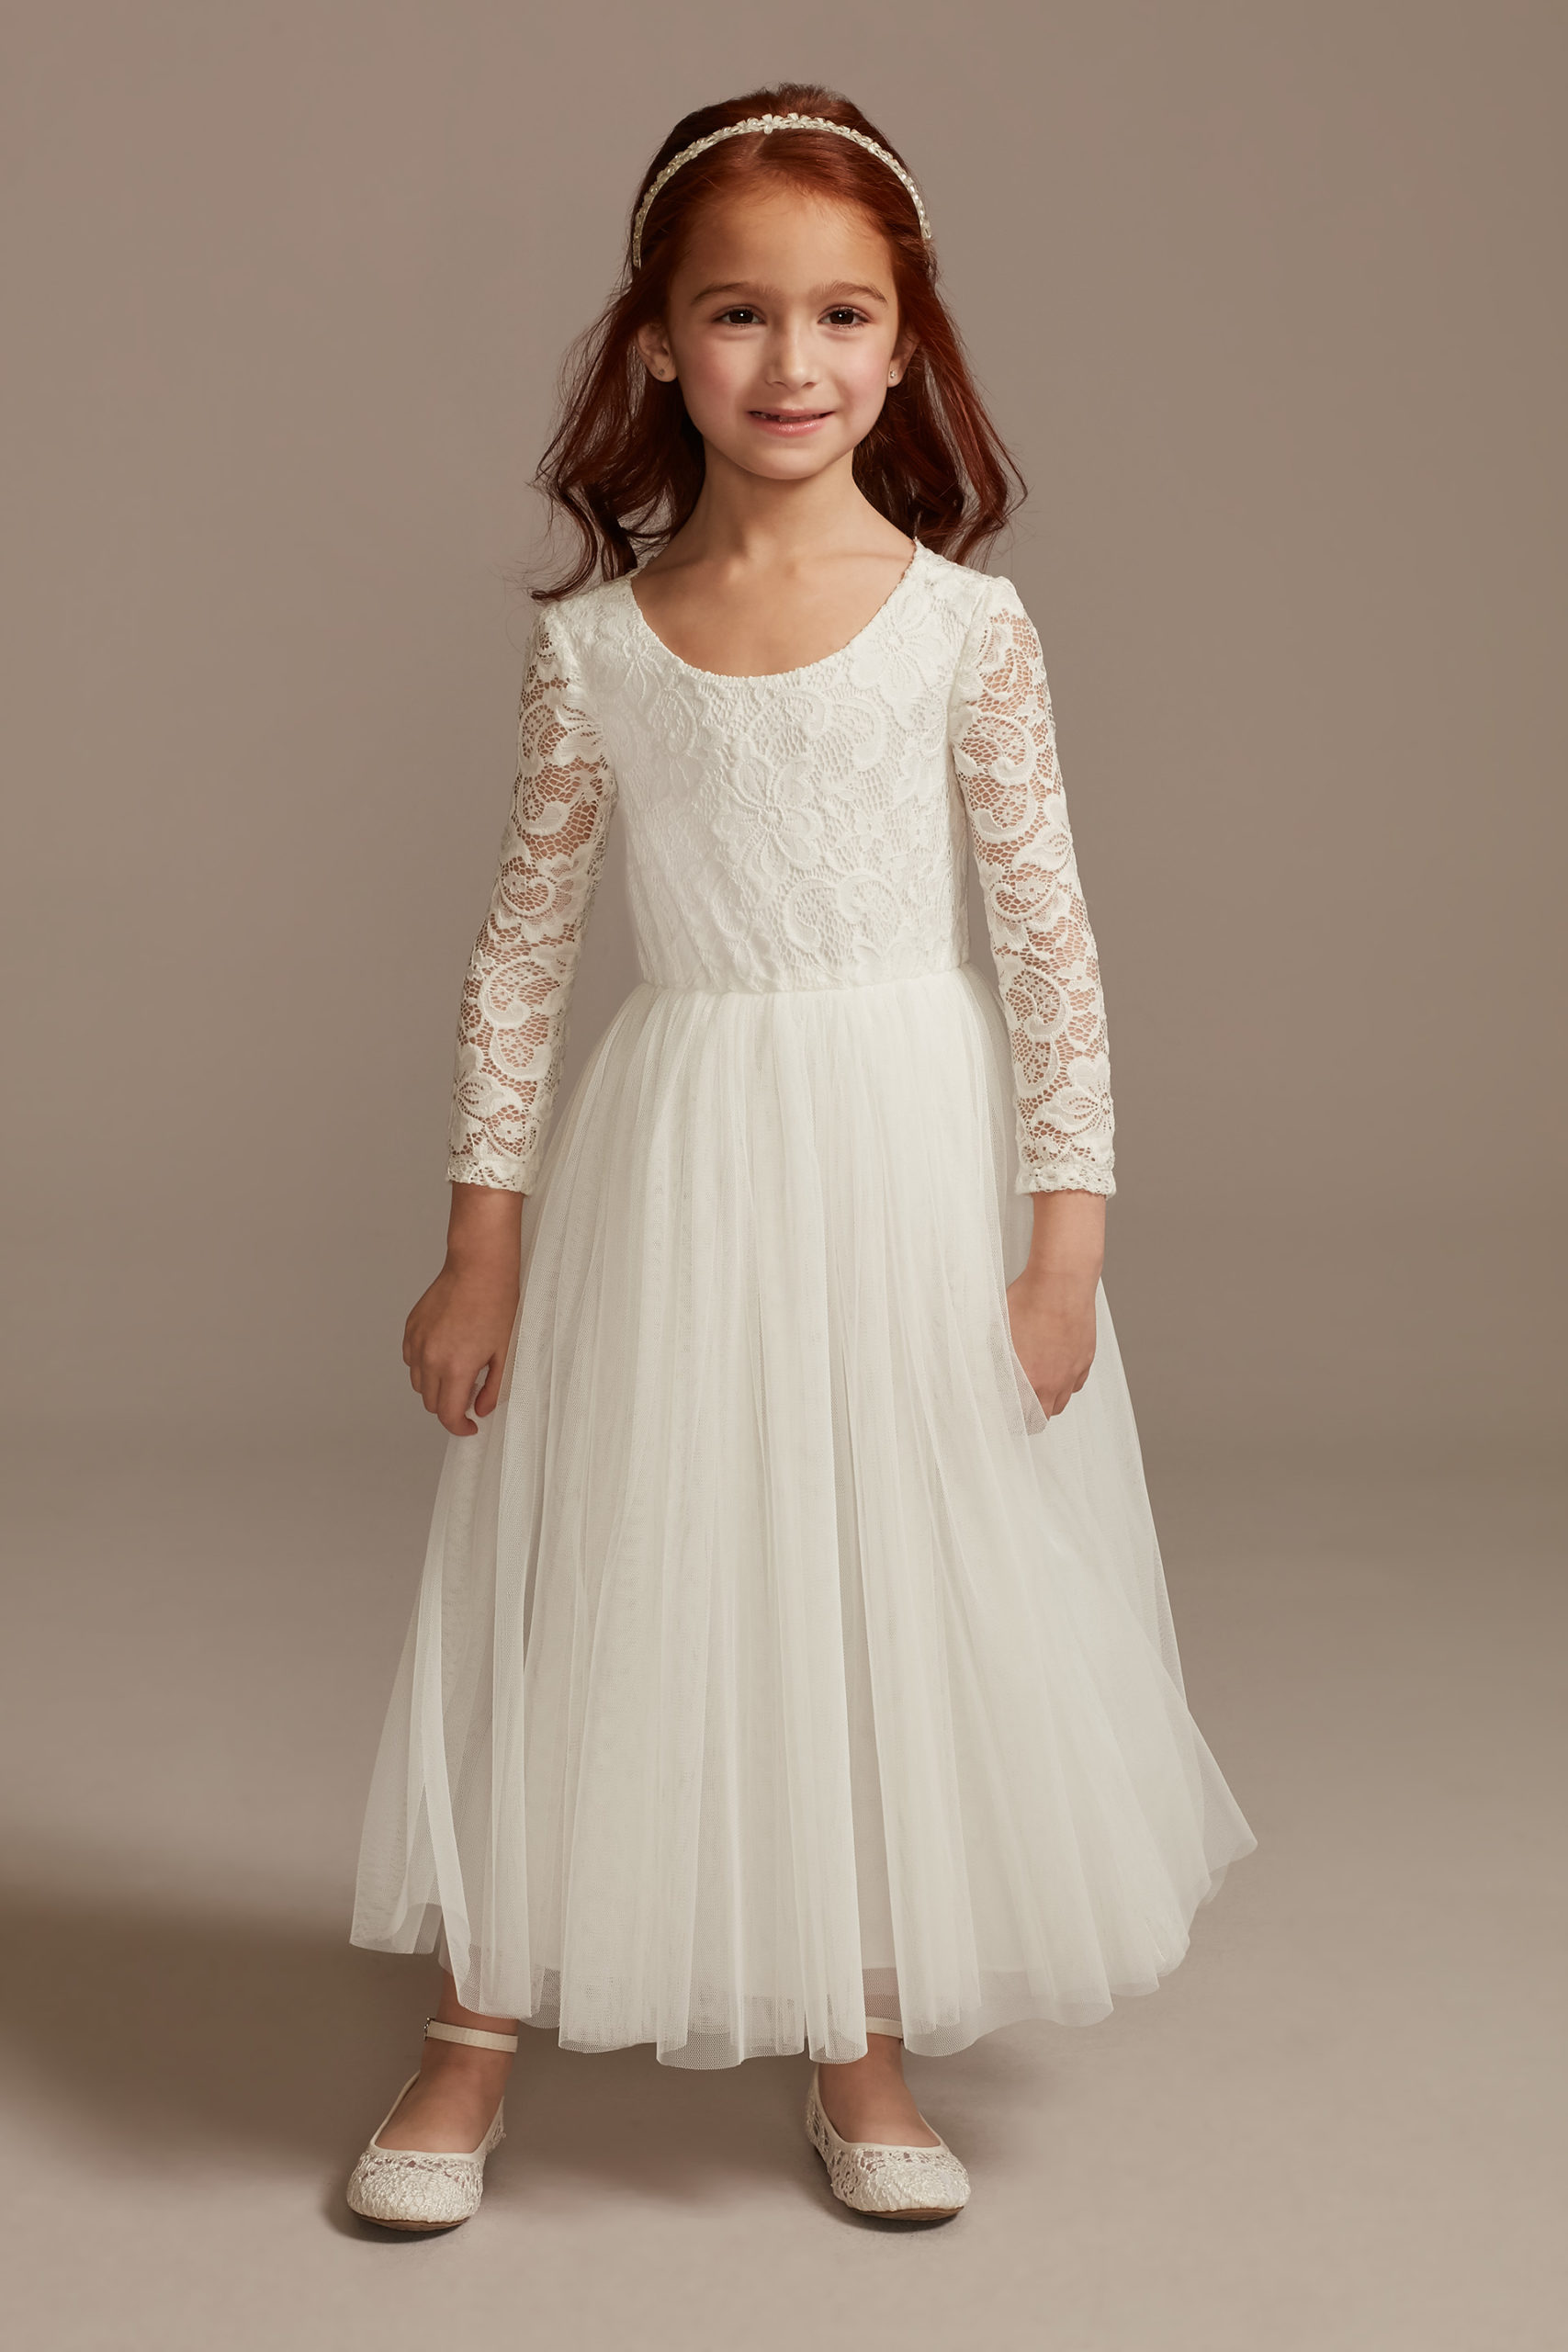 Children dresses 2020 wholesale from the manufacturer Pantelei